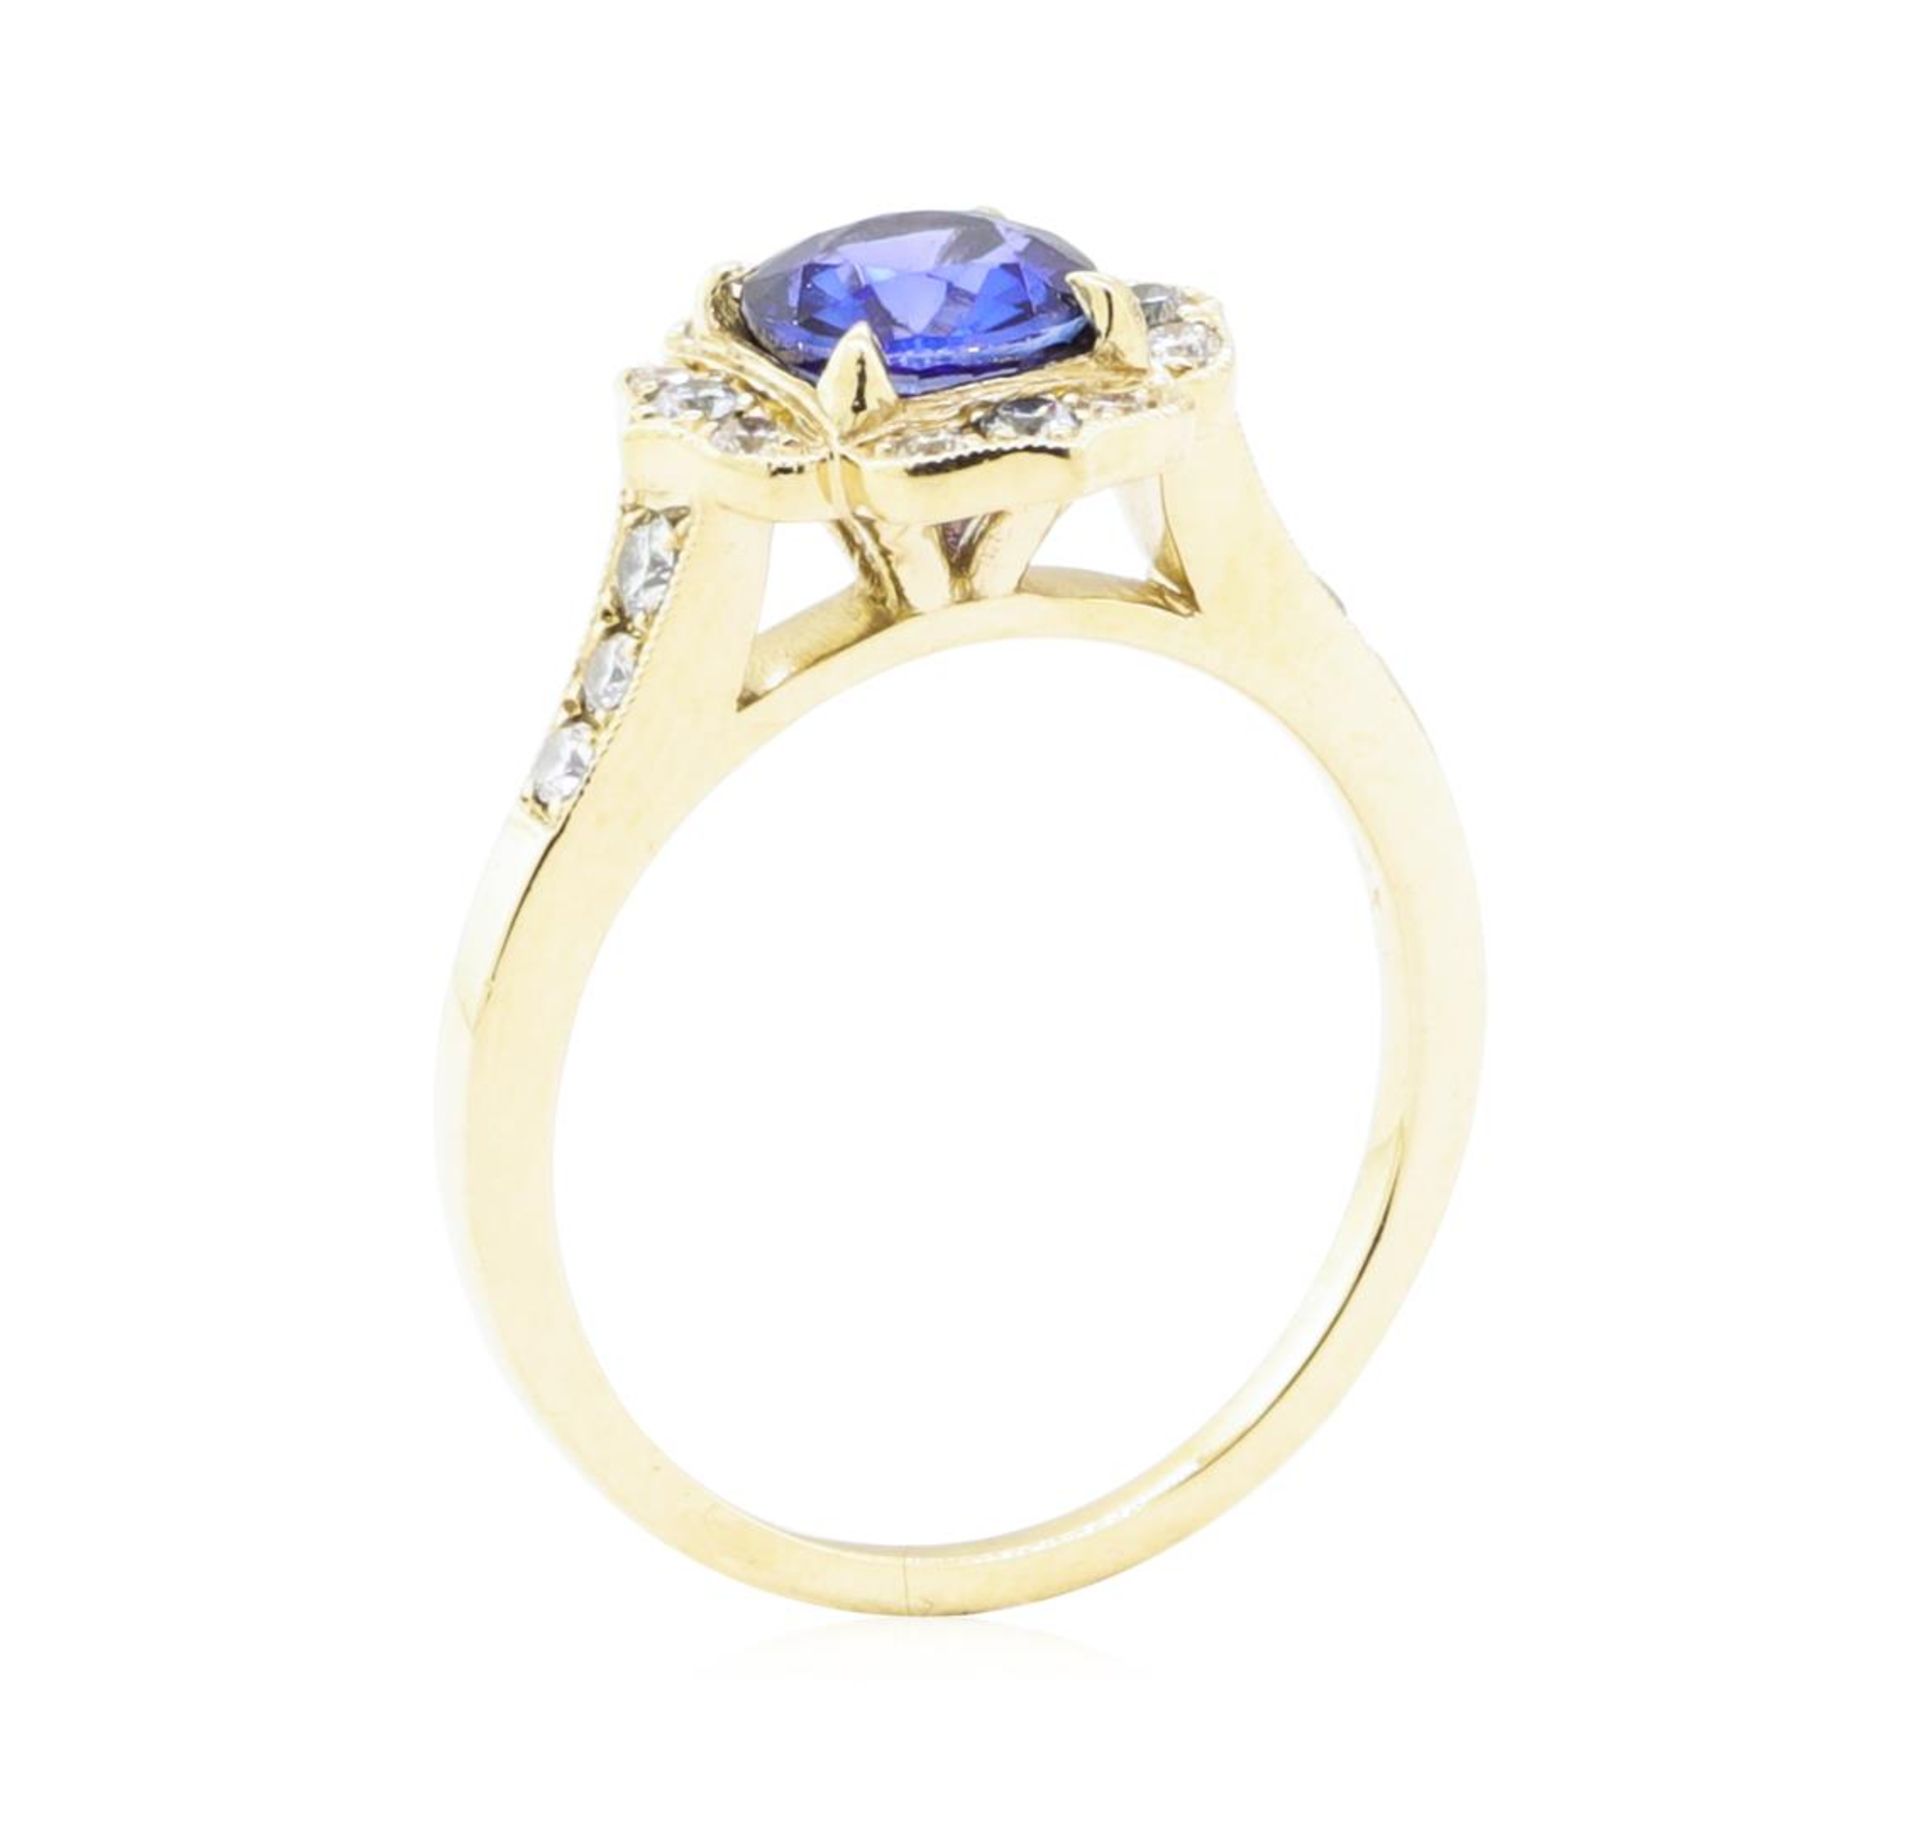 1.50 ctw Sapphire and Diamond Ring - 14KT Yellow Gold - Image 4 of 4